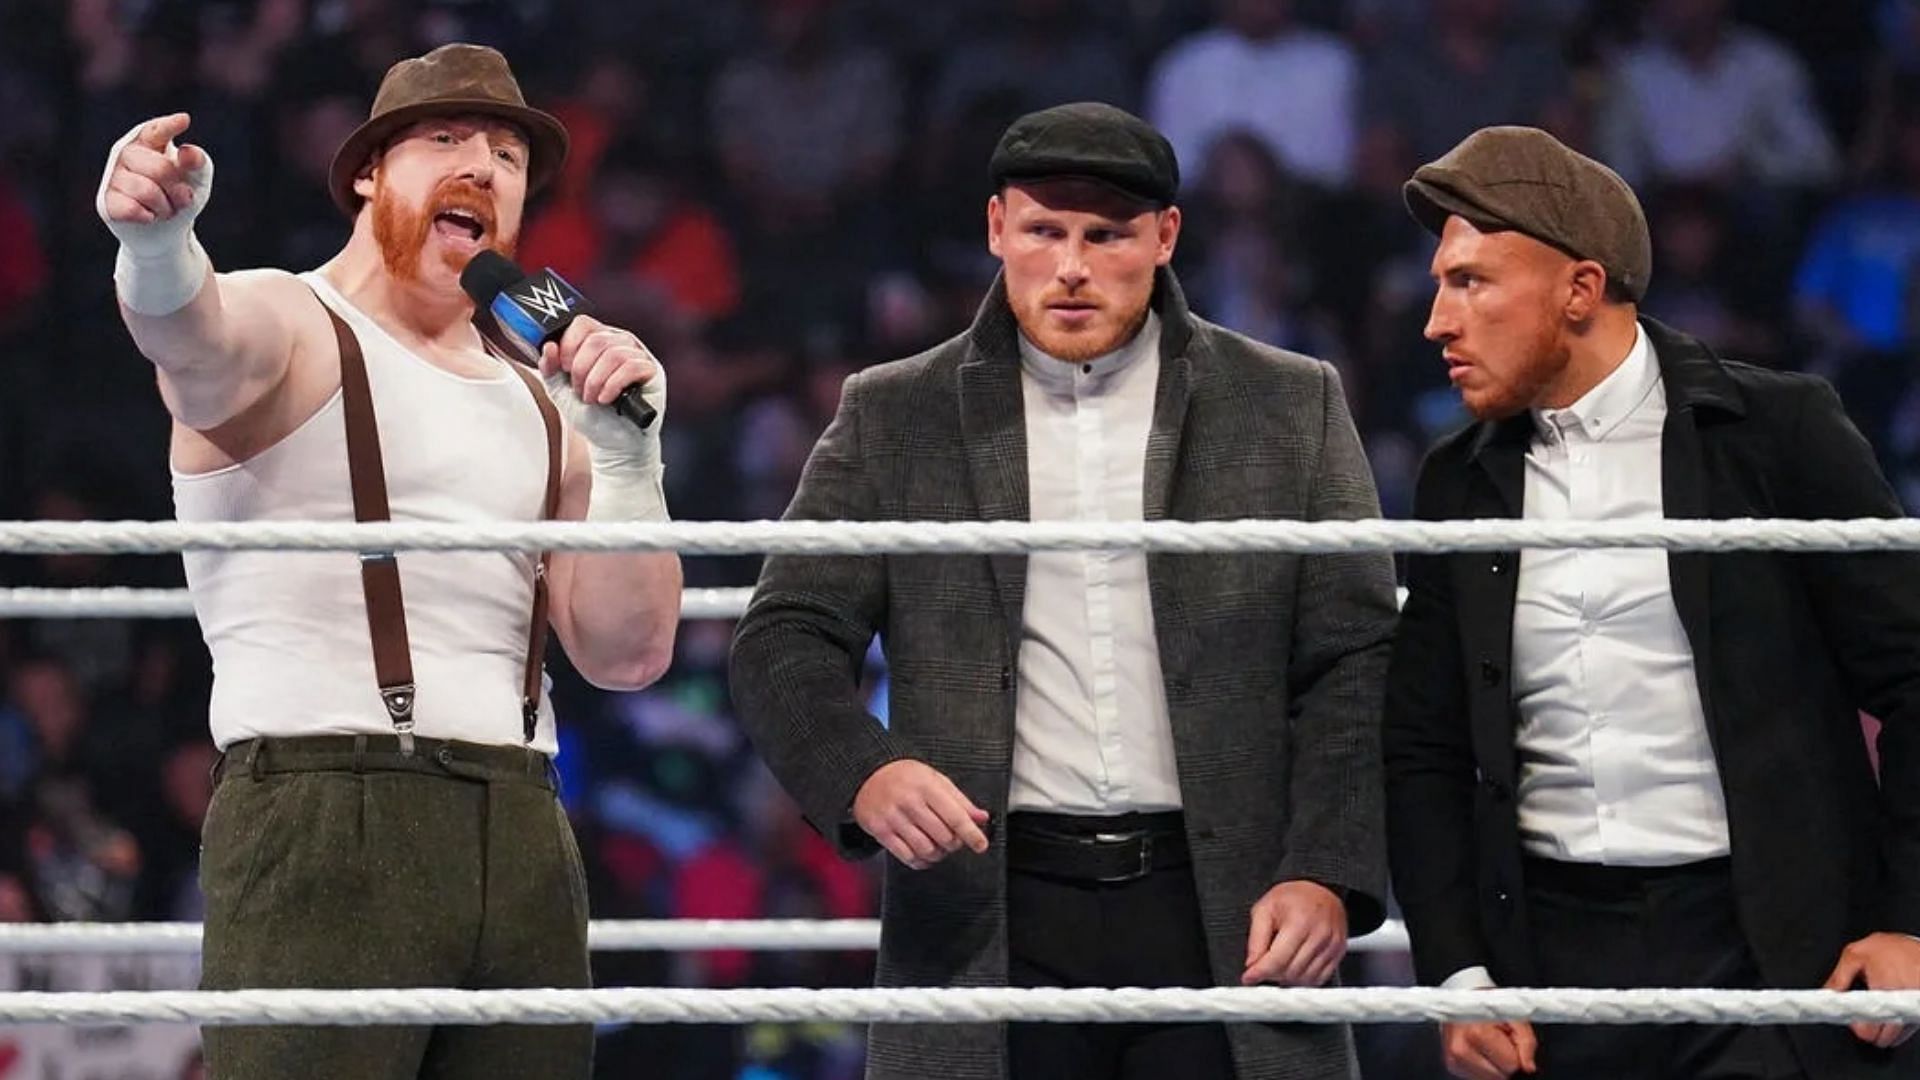 Sheamus and The Brawling Brutes cutting a promo in WWE